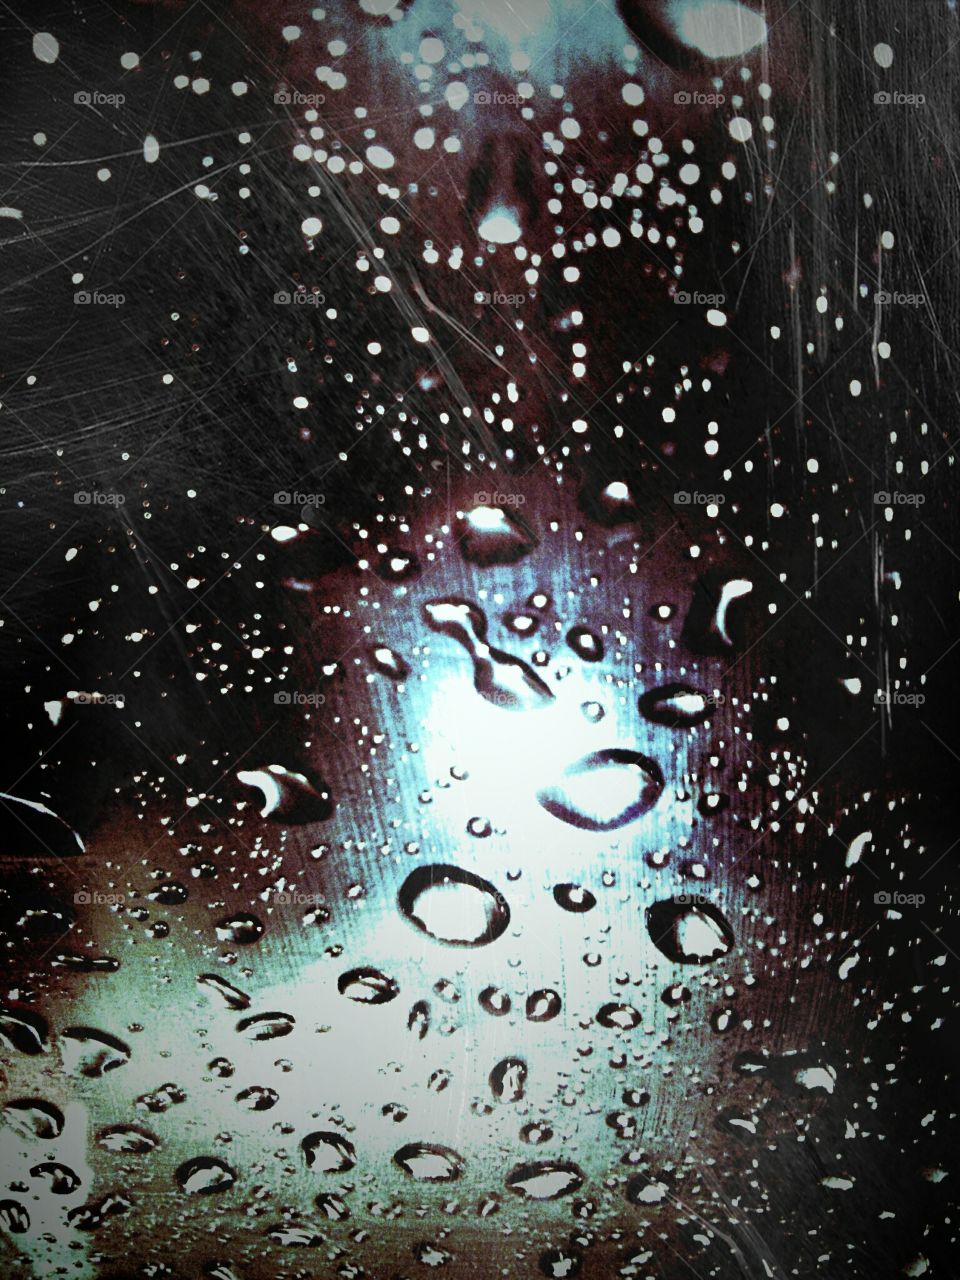 The Sky Cries. Just loved the way the light's hit the rain drops on the window.